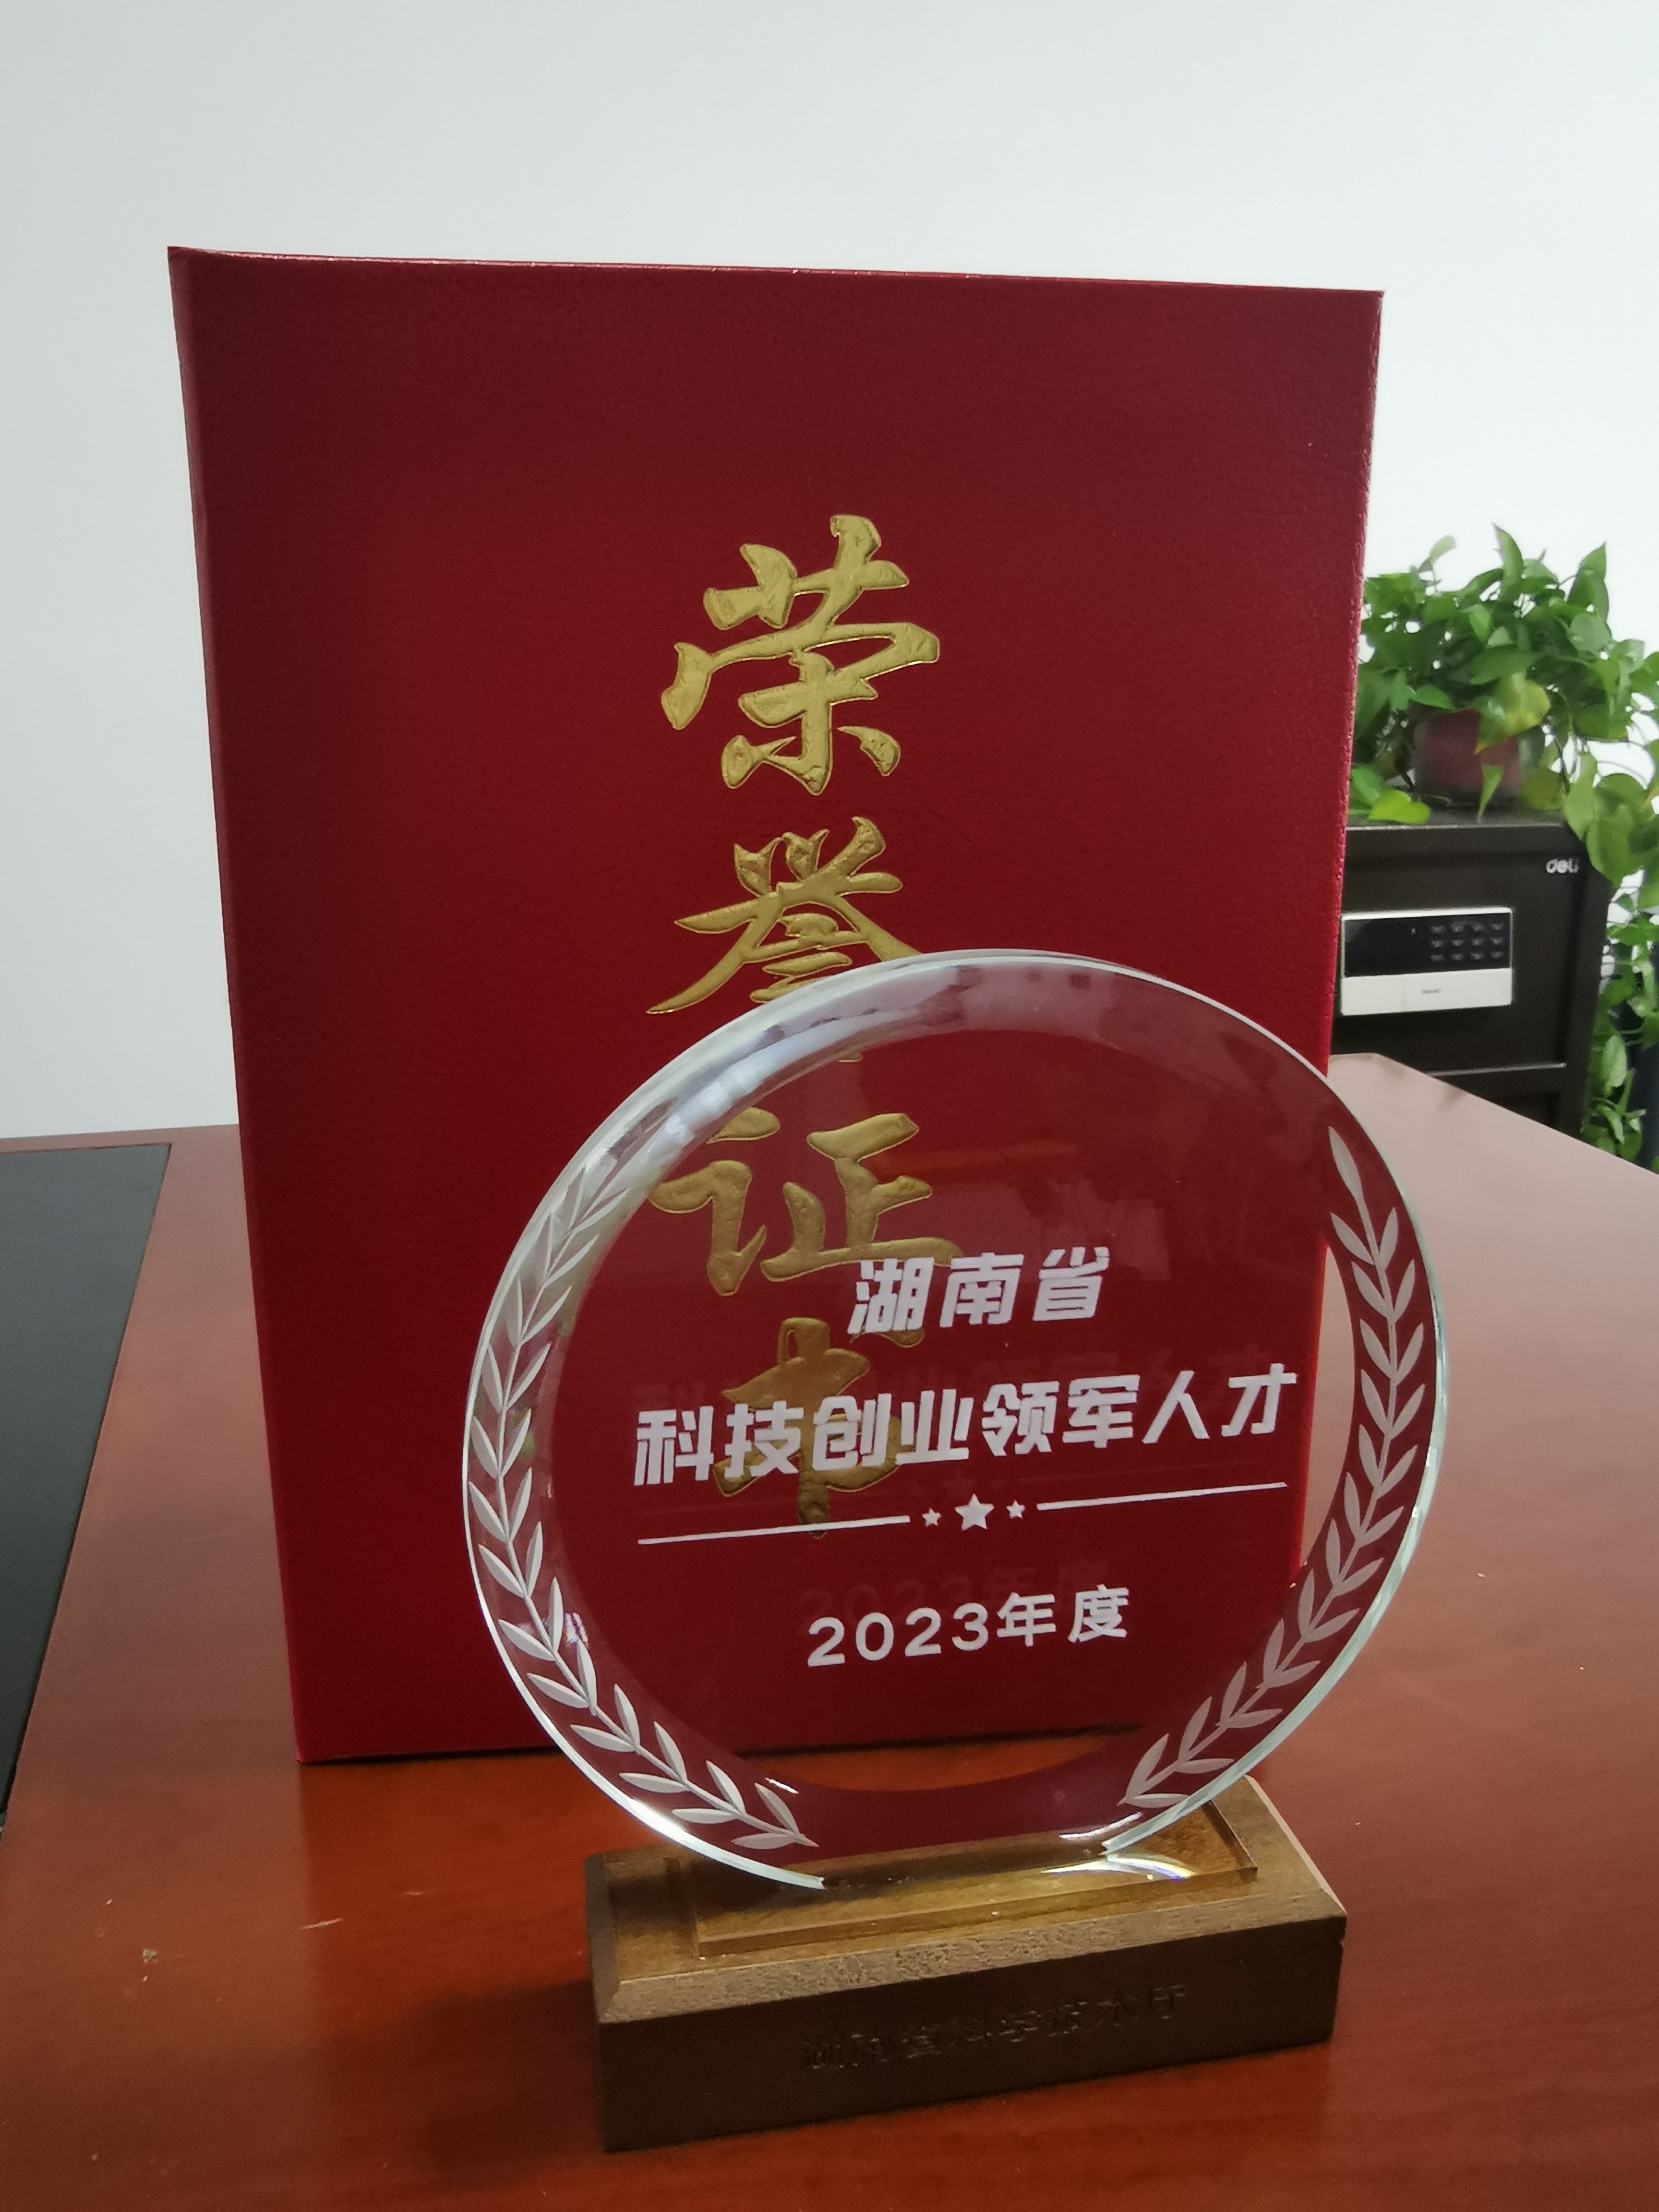 Good news-Chairman Zeng Zhiheng was awarded Hunan Province’s “Three Top” Scientific and Technological Innovation Leading Talents!